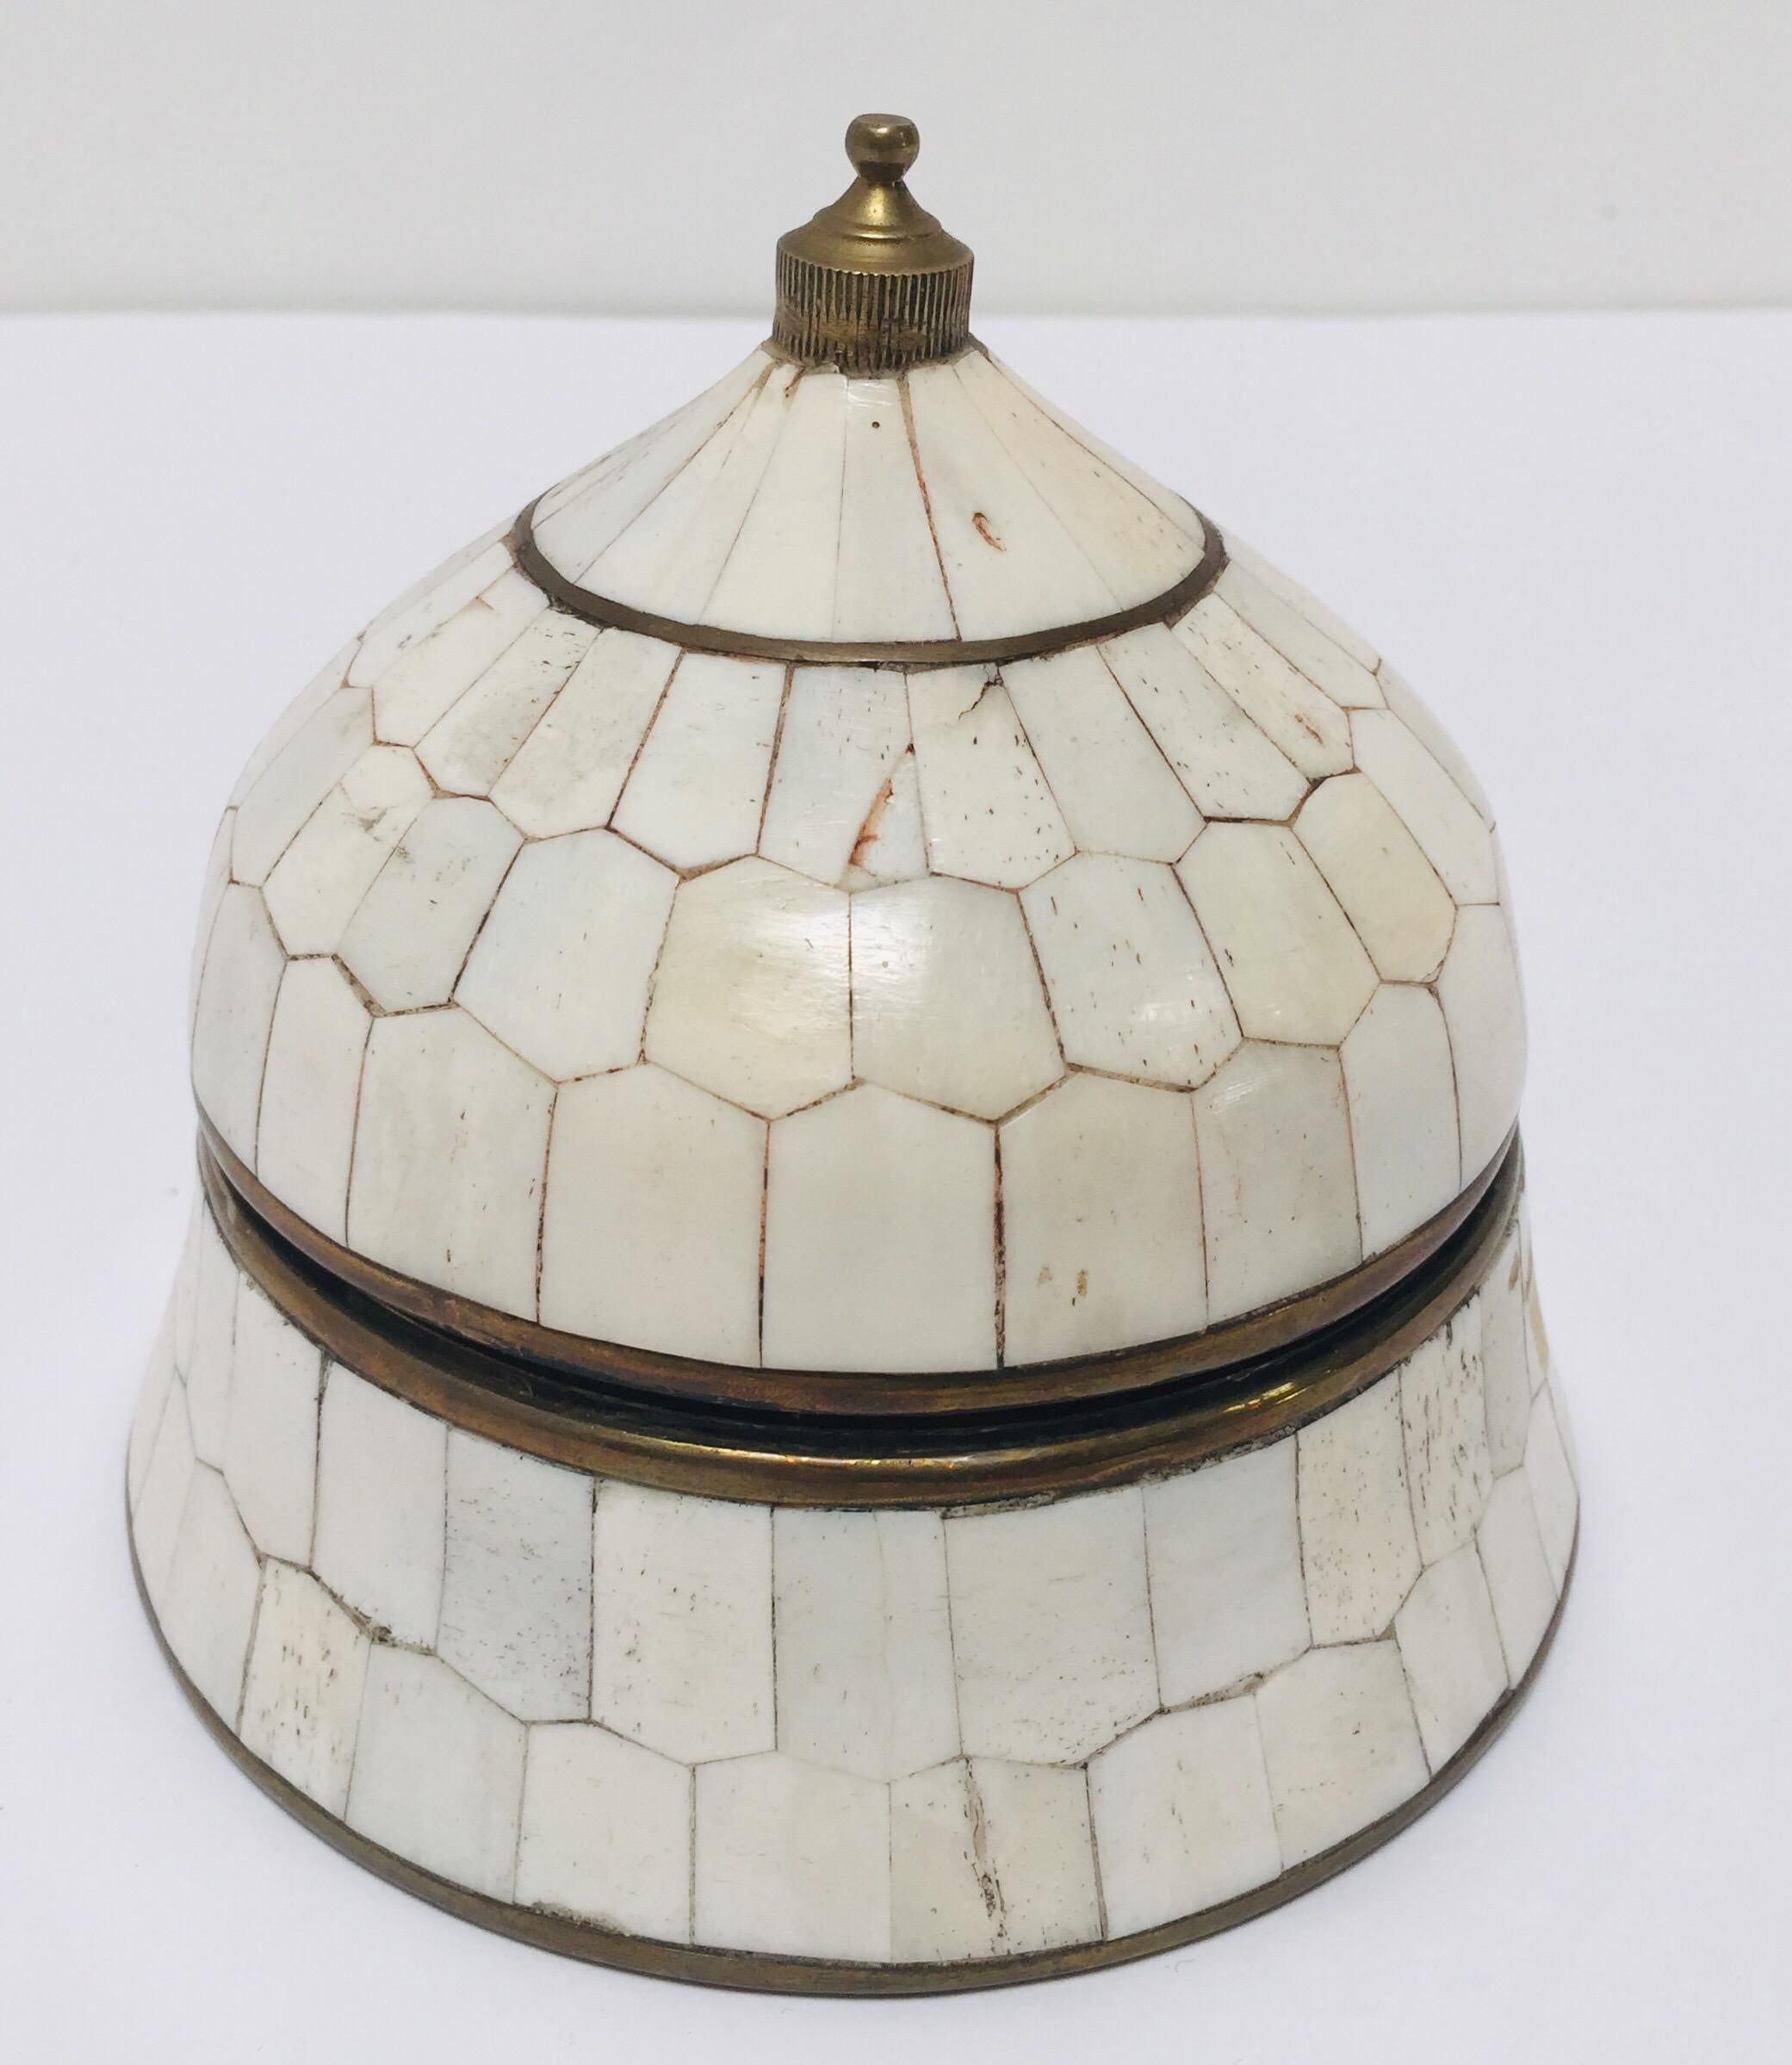 Hand-Crafted Moroccan Decorative Trinket Box Inlaid with White Bone and Brass